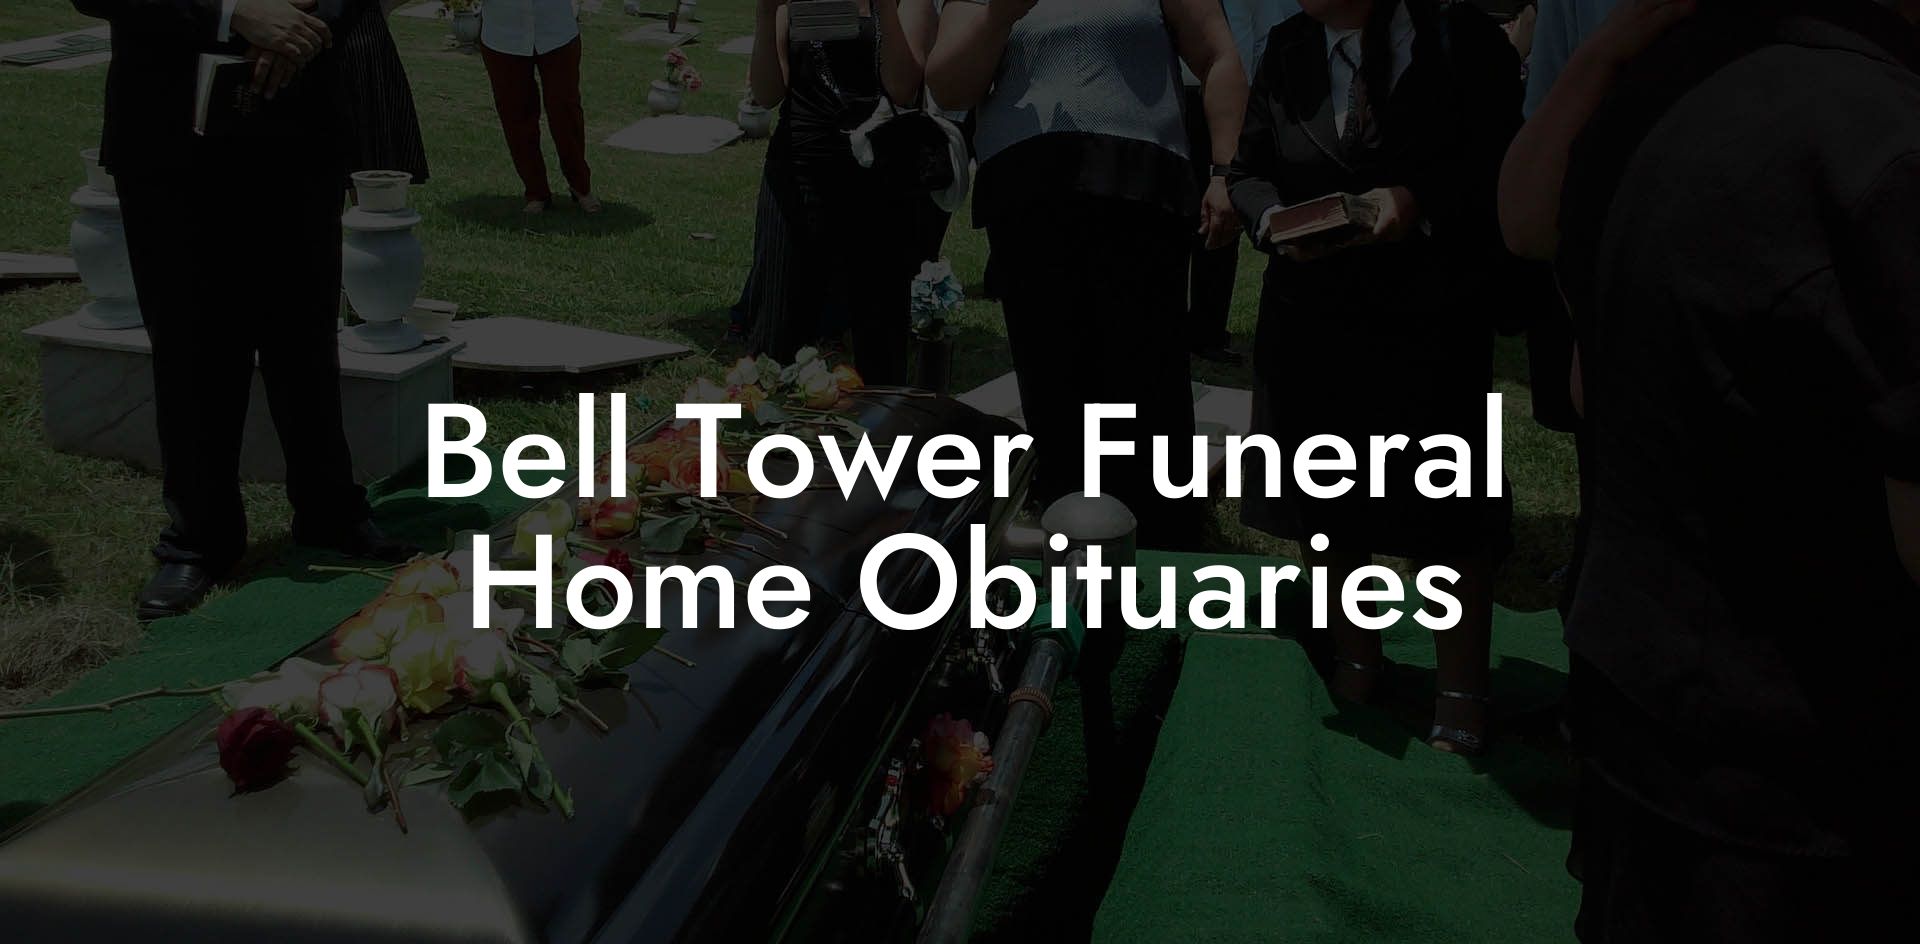 Bell Tower Funeral Home Obituaries